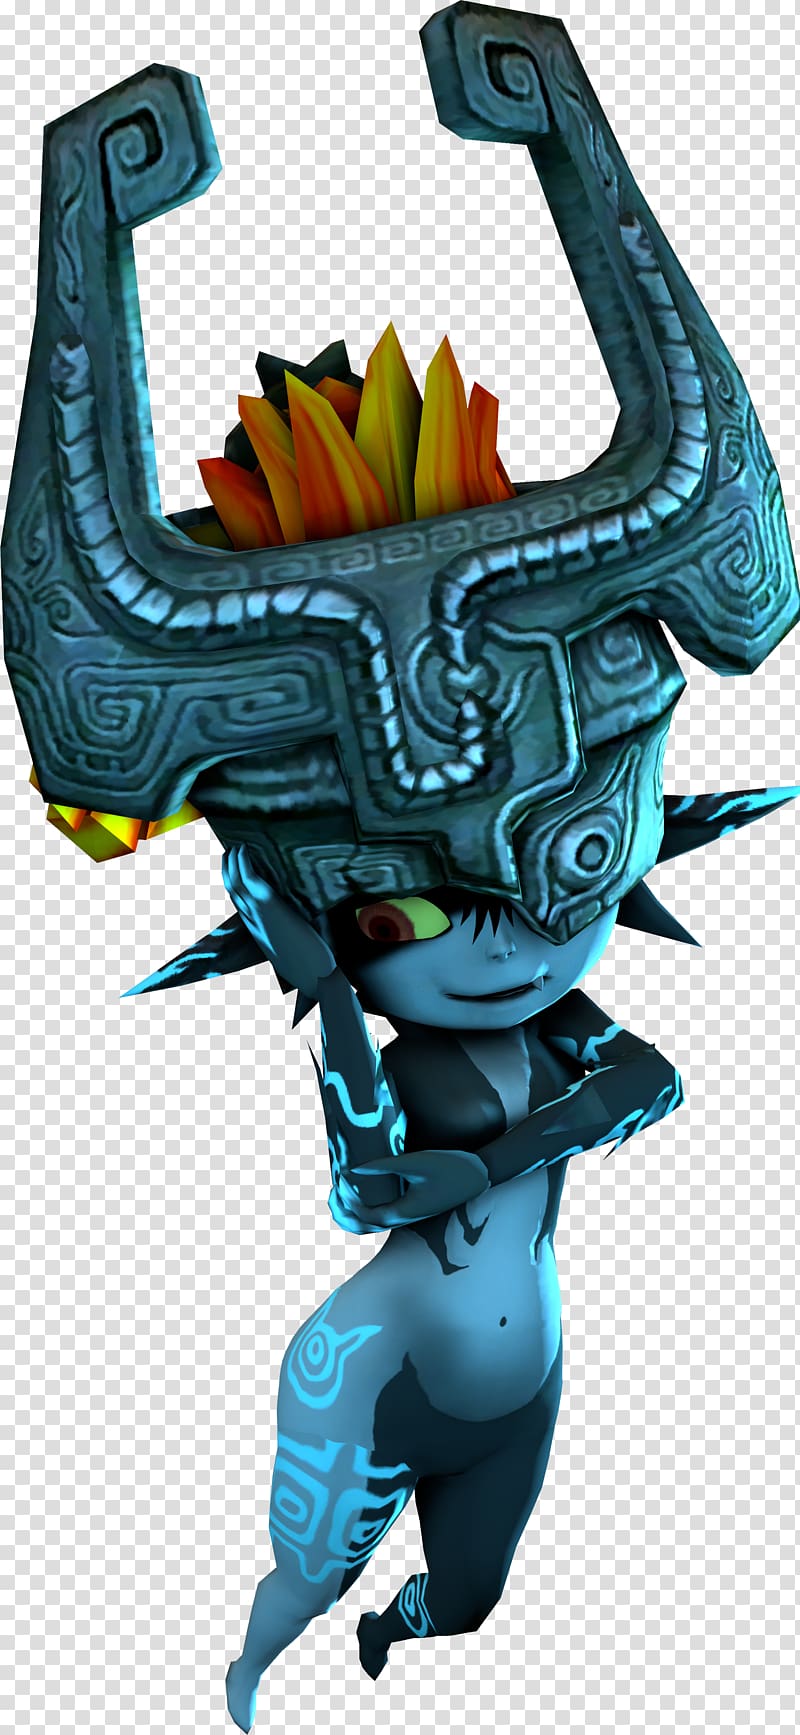 The Legend of Zelda: Twilight Princess Midna Cartoon Action & Toy Figures, others transparent background PNG clipart